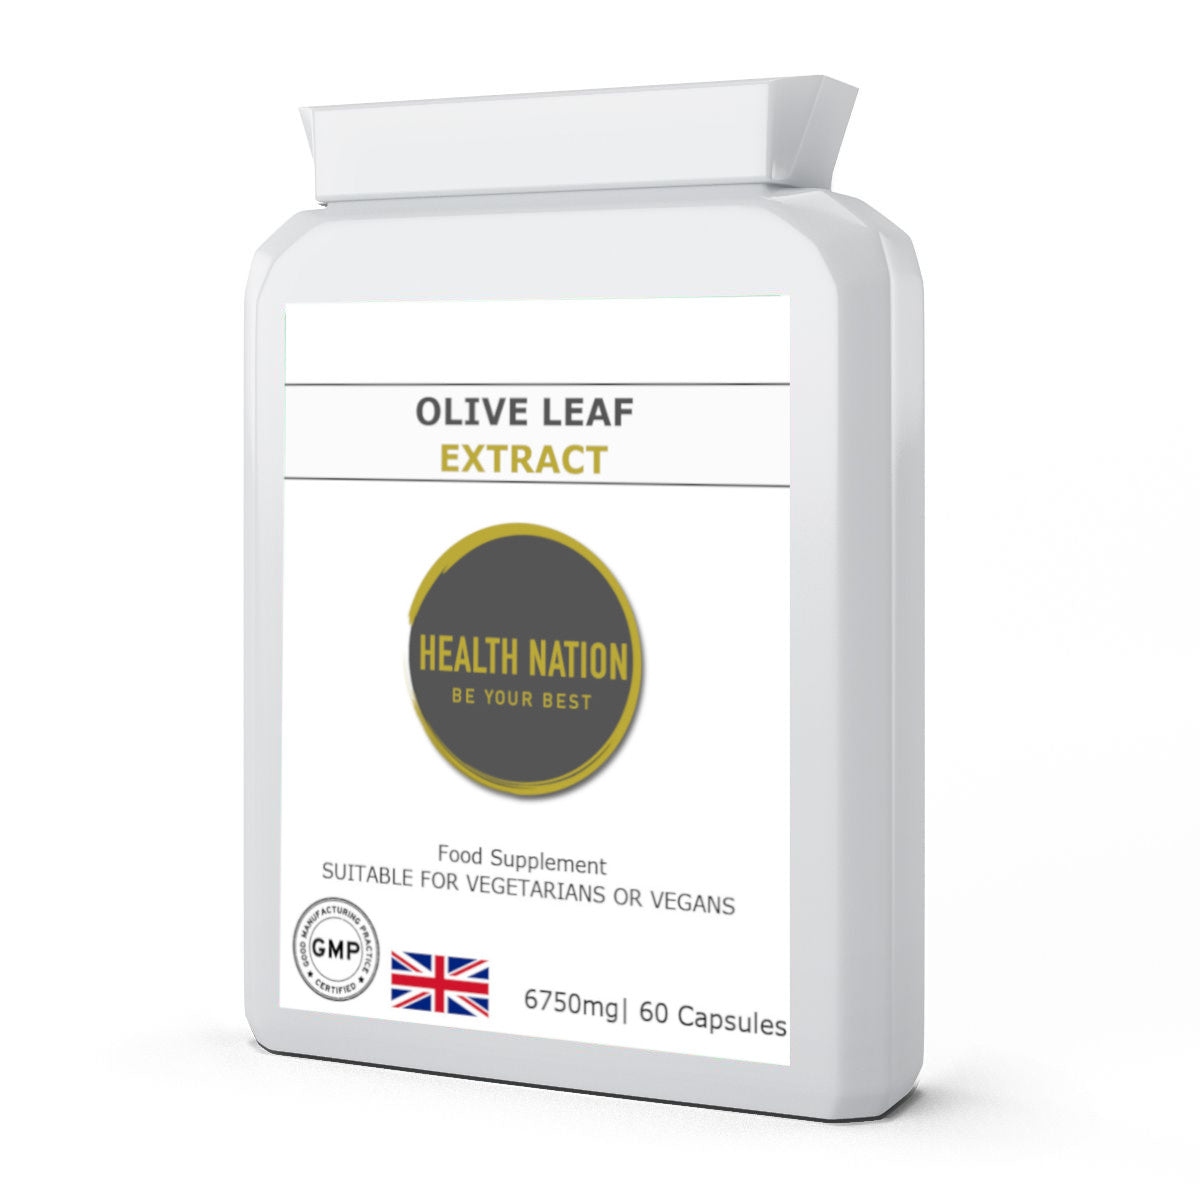 Olive Leaf Extract | Helps with Mental Clarity, Energy, Cold/Flu, Joint Pain, Weight Loss and Balances Blood Sugar | Made in UK | 6750mg 60 Capsules - Health Nation